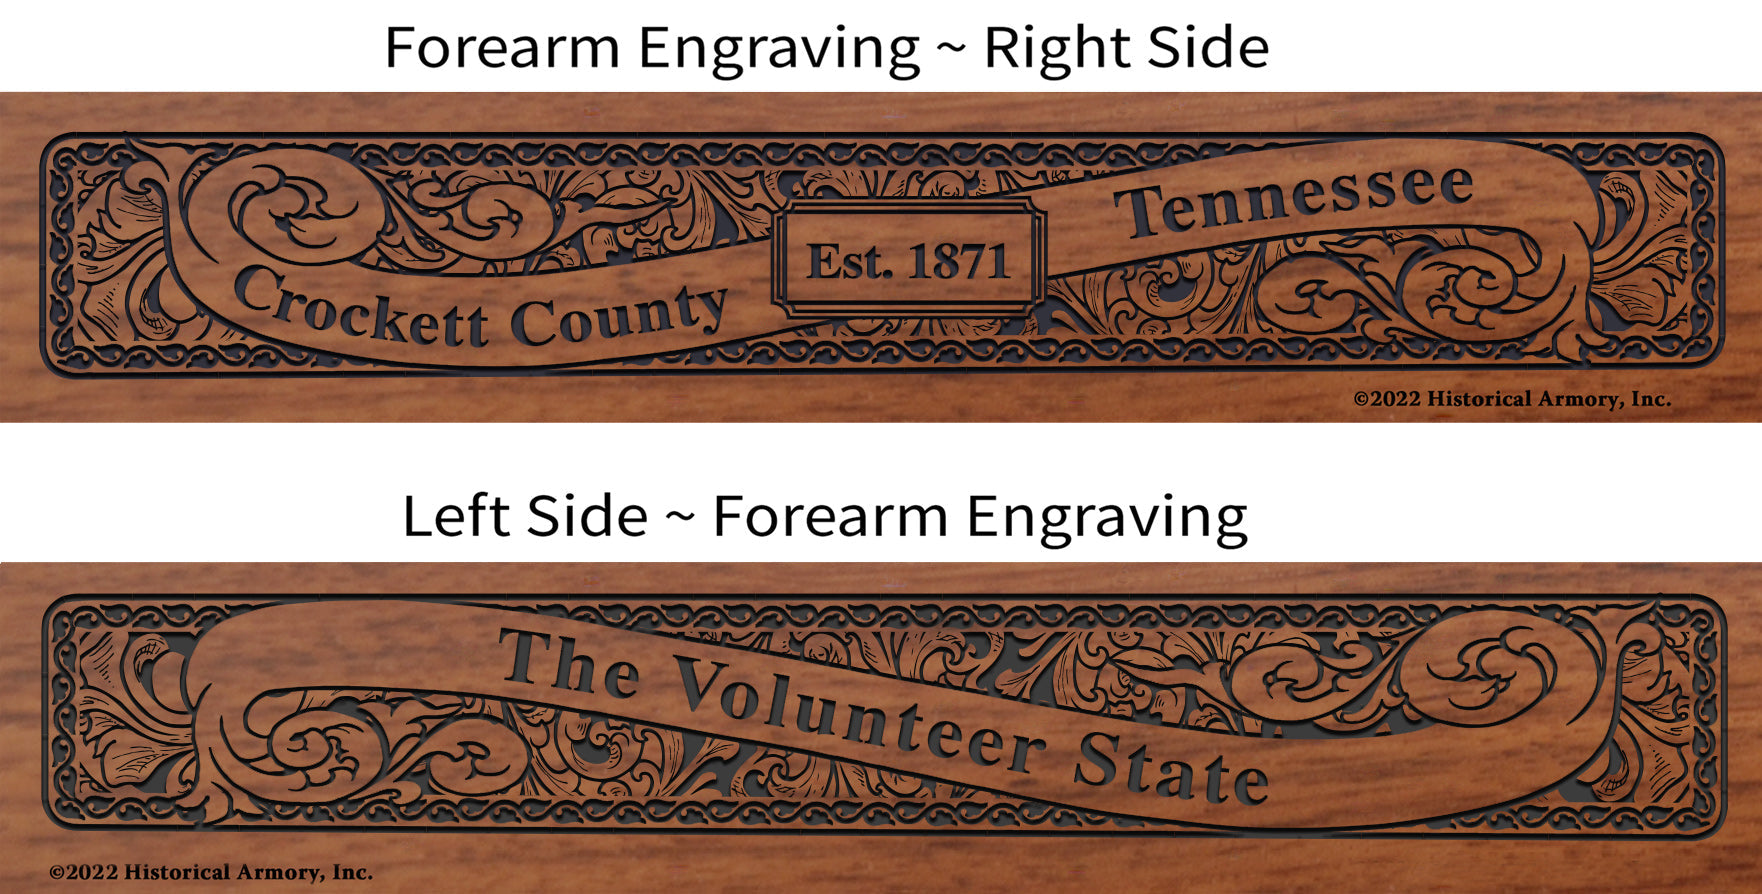 Crockett County Tennessee Engraved Rifle Forearm